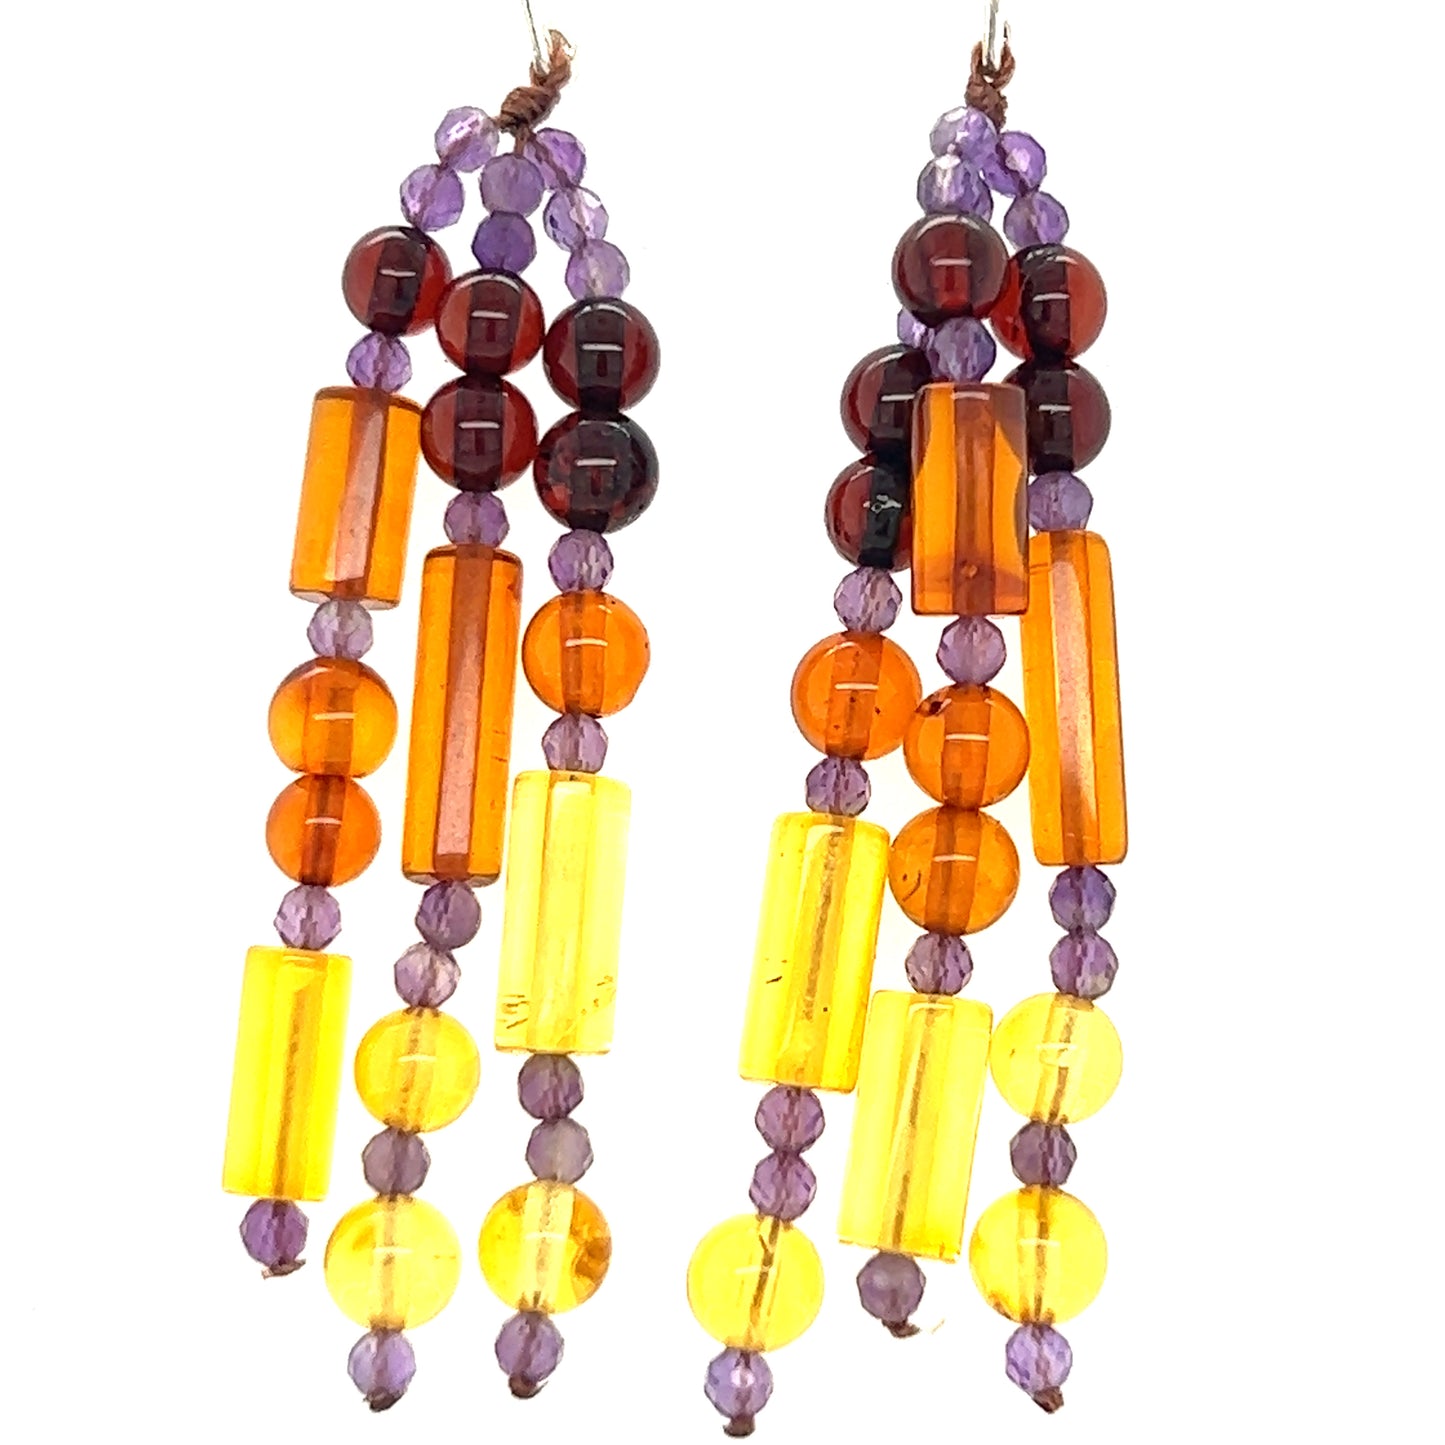 A pair of Super Silver Gorgeous Baltic Amber and Amethyst Beaded Earrings.